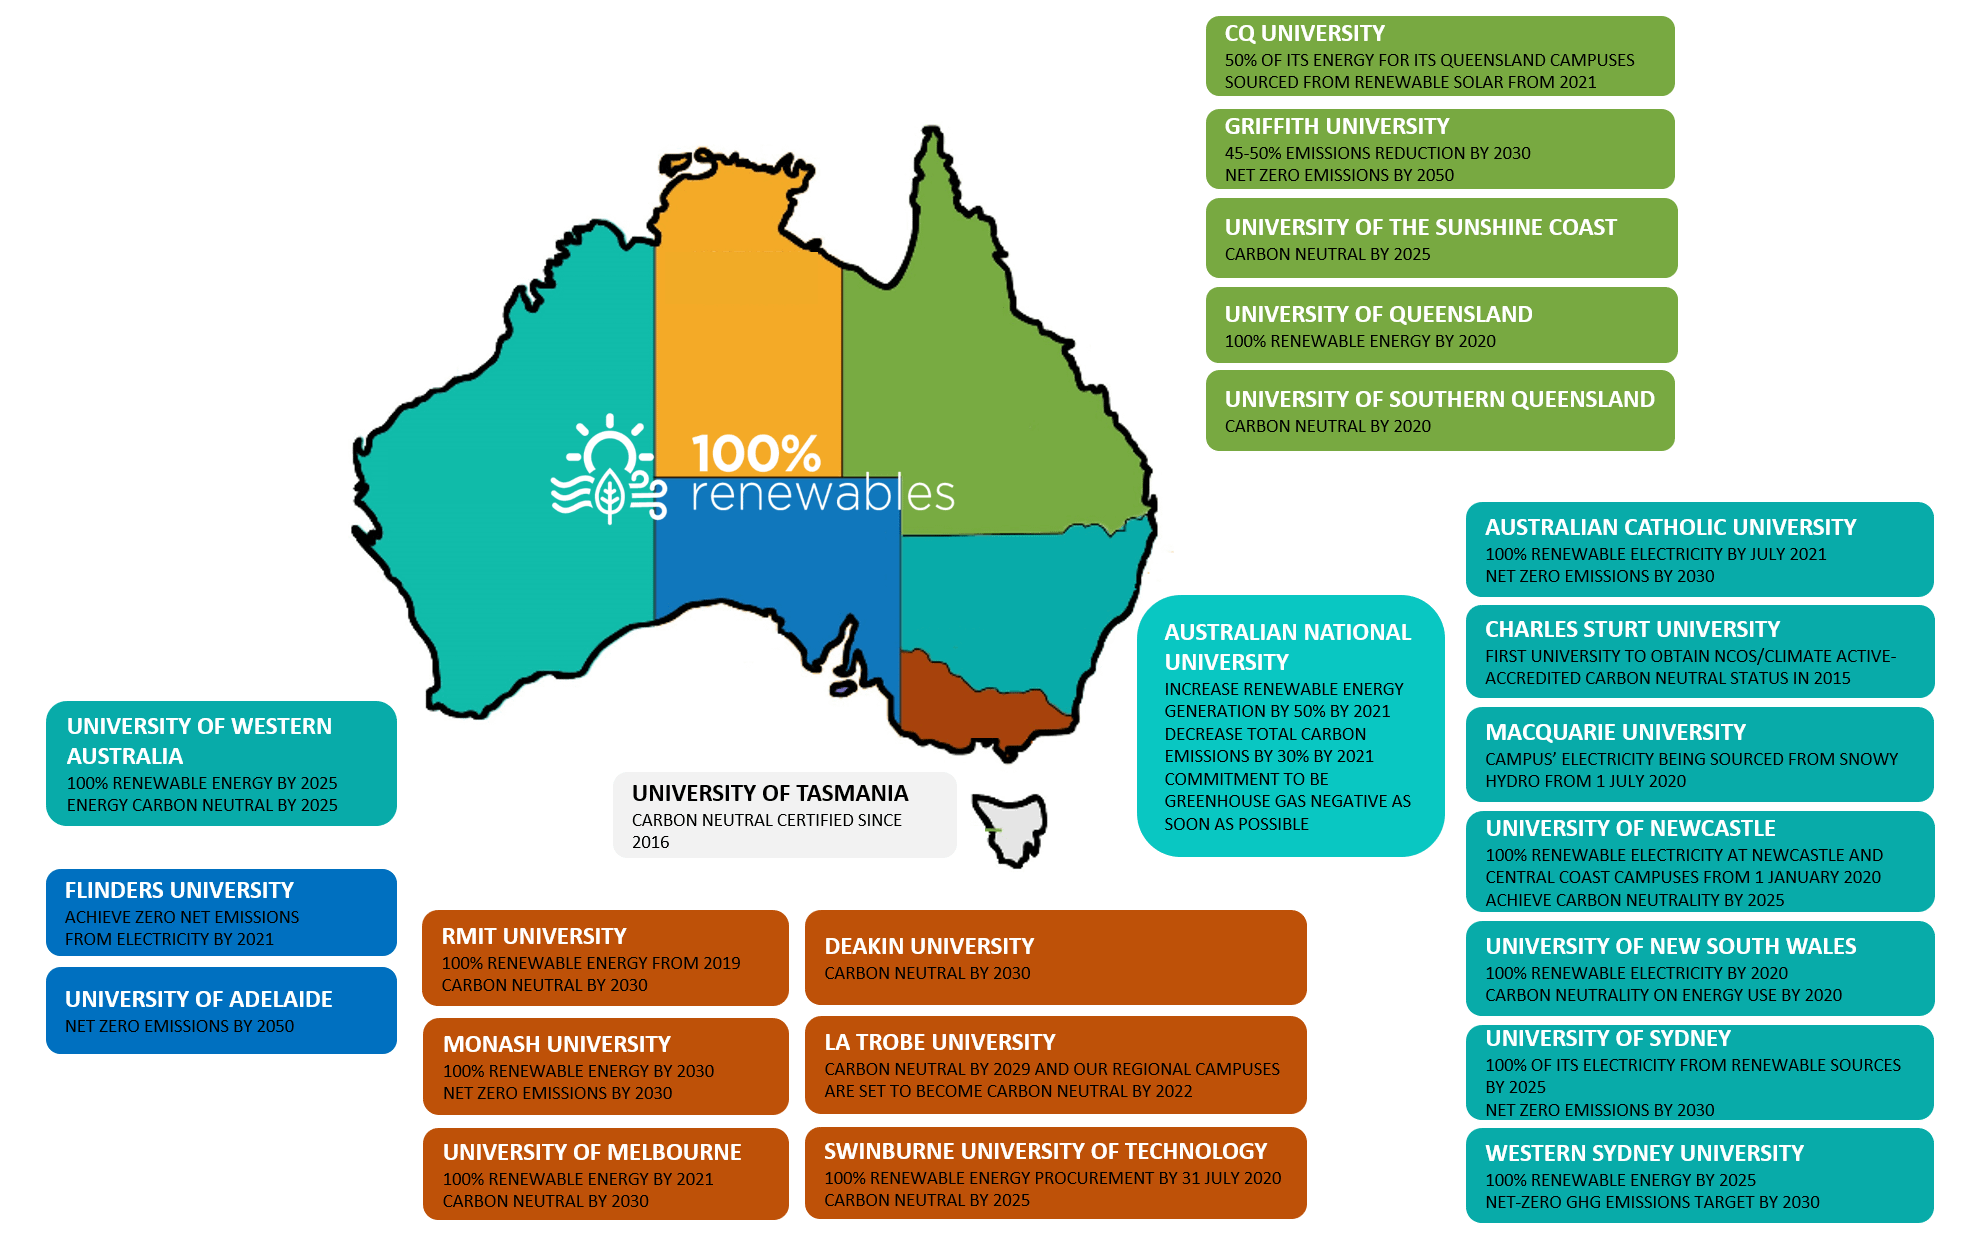 Carbon neutral, net zero and 100% renewables commitments by Australian universities as at Feb 2021 (map)